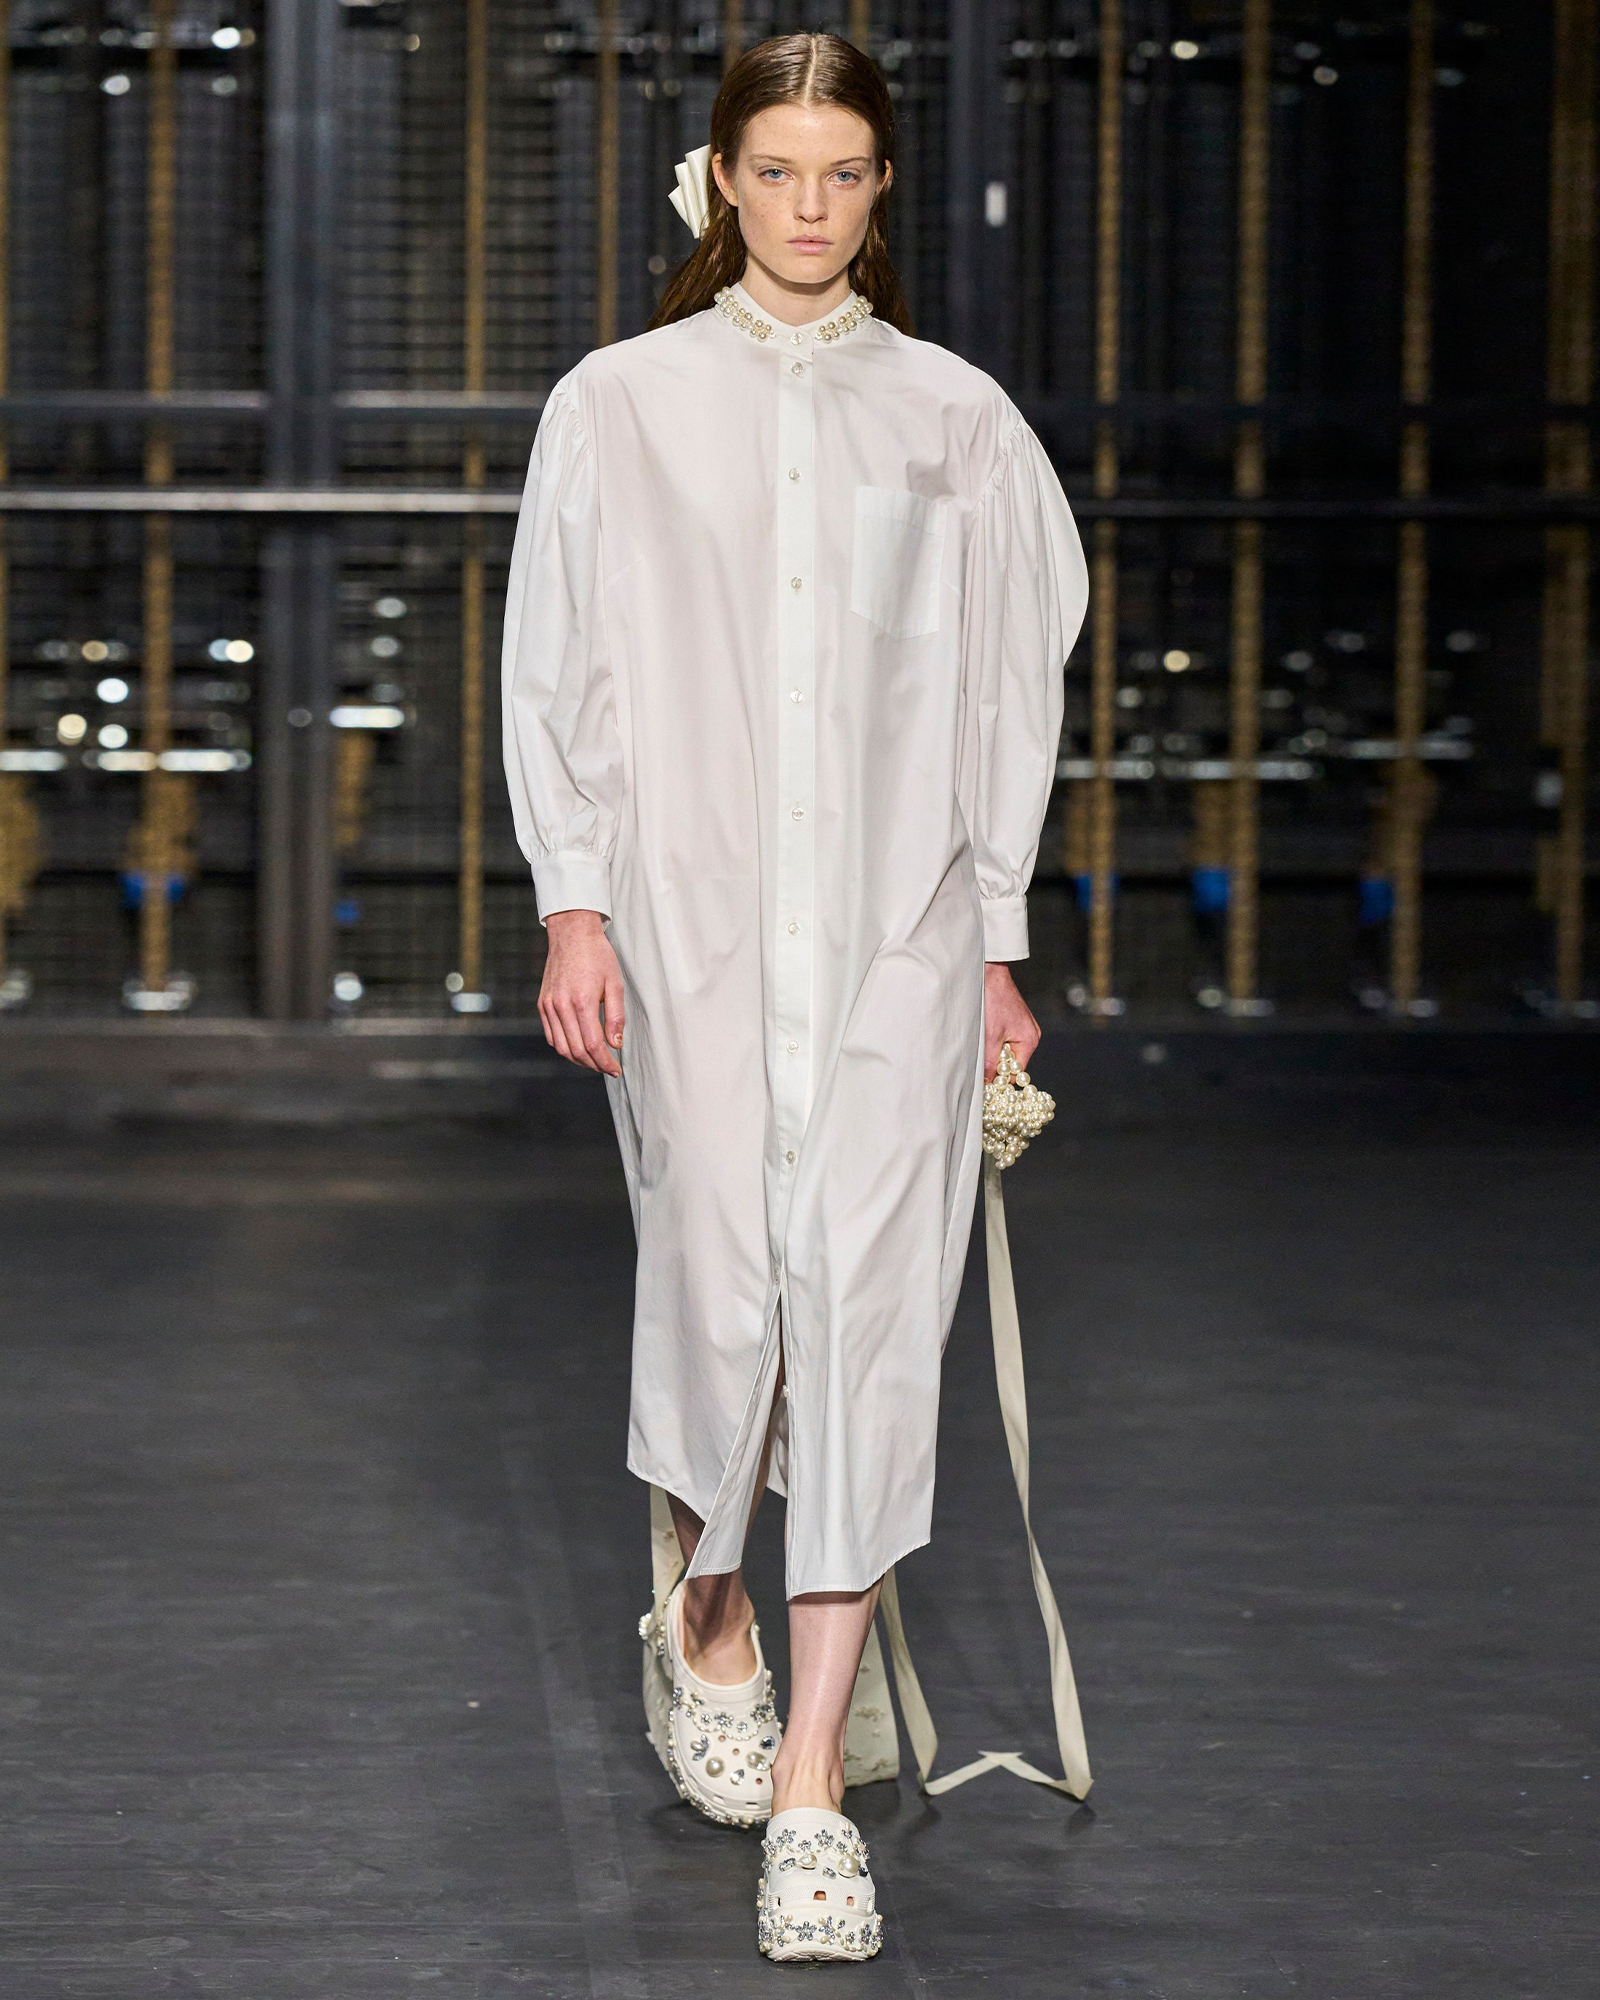 White dress and couture crocs by Simone Rocha.